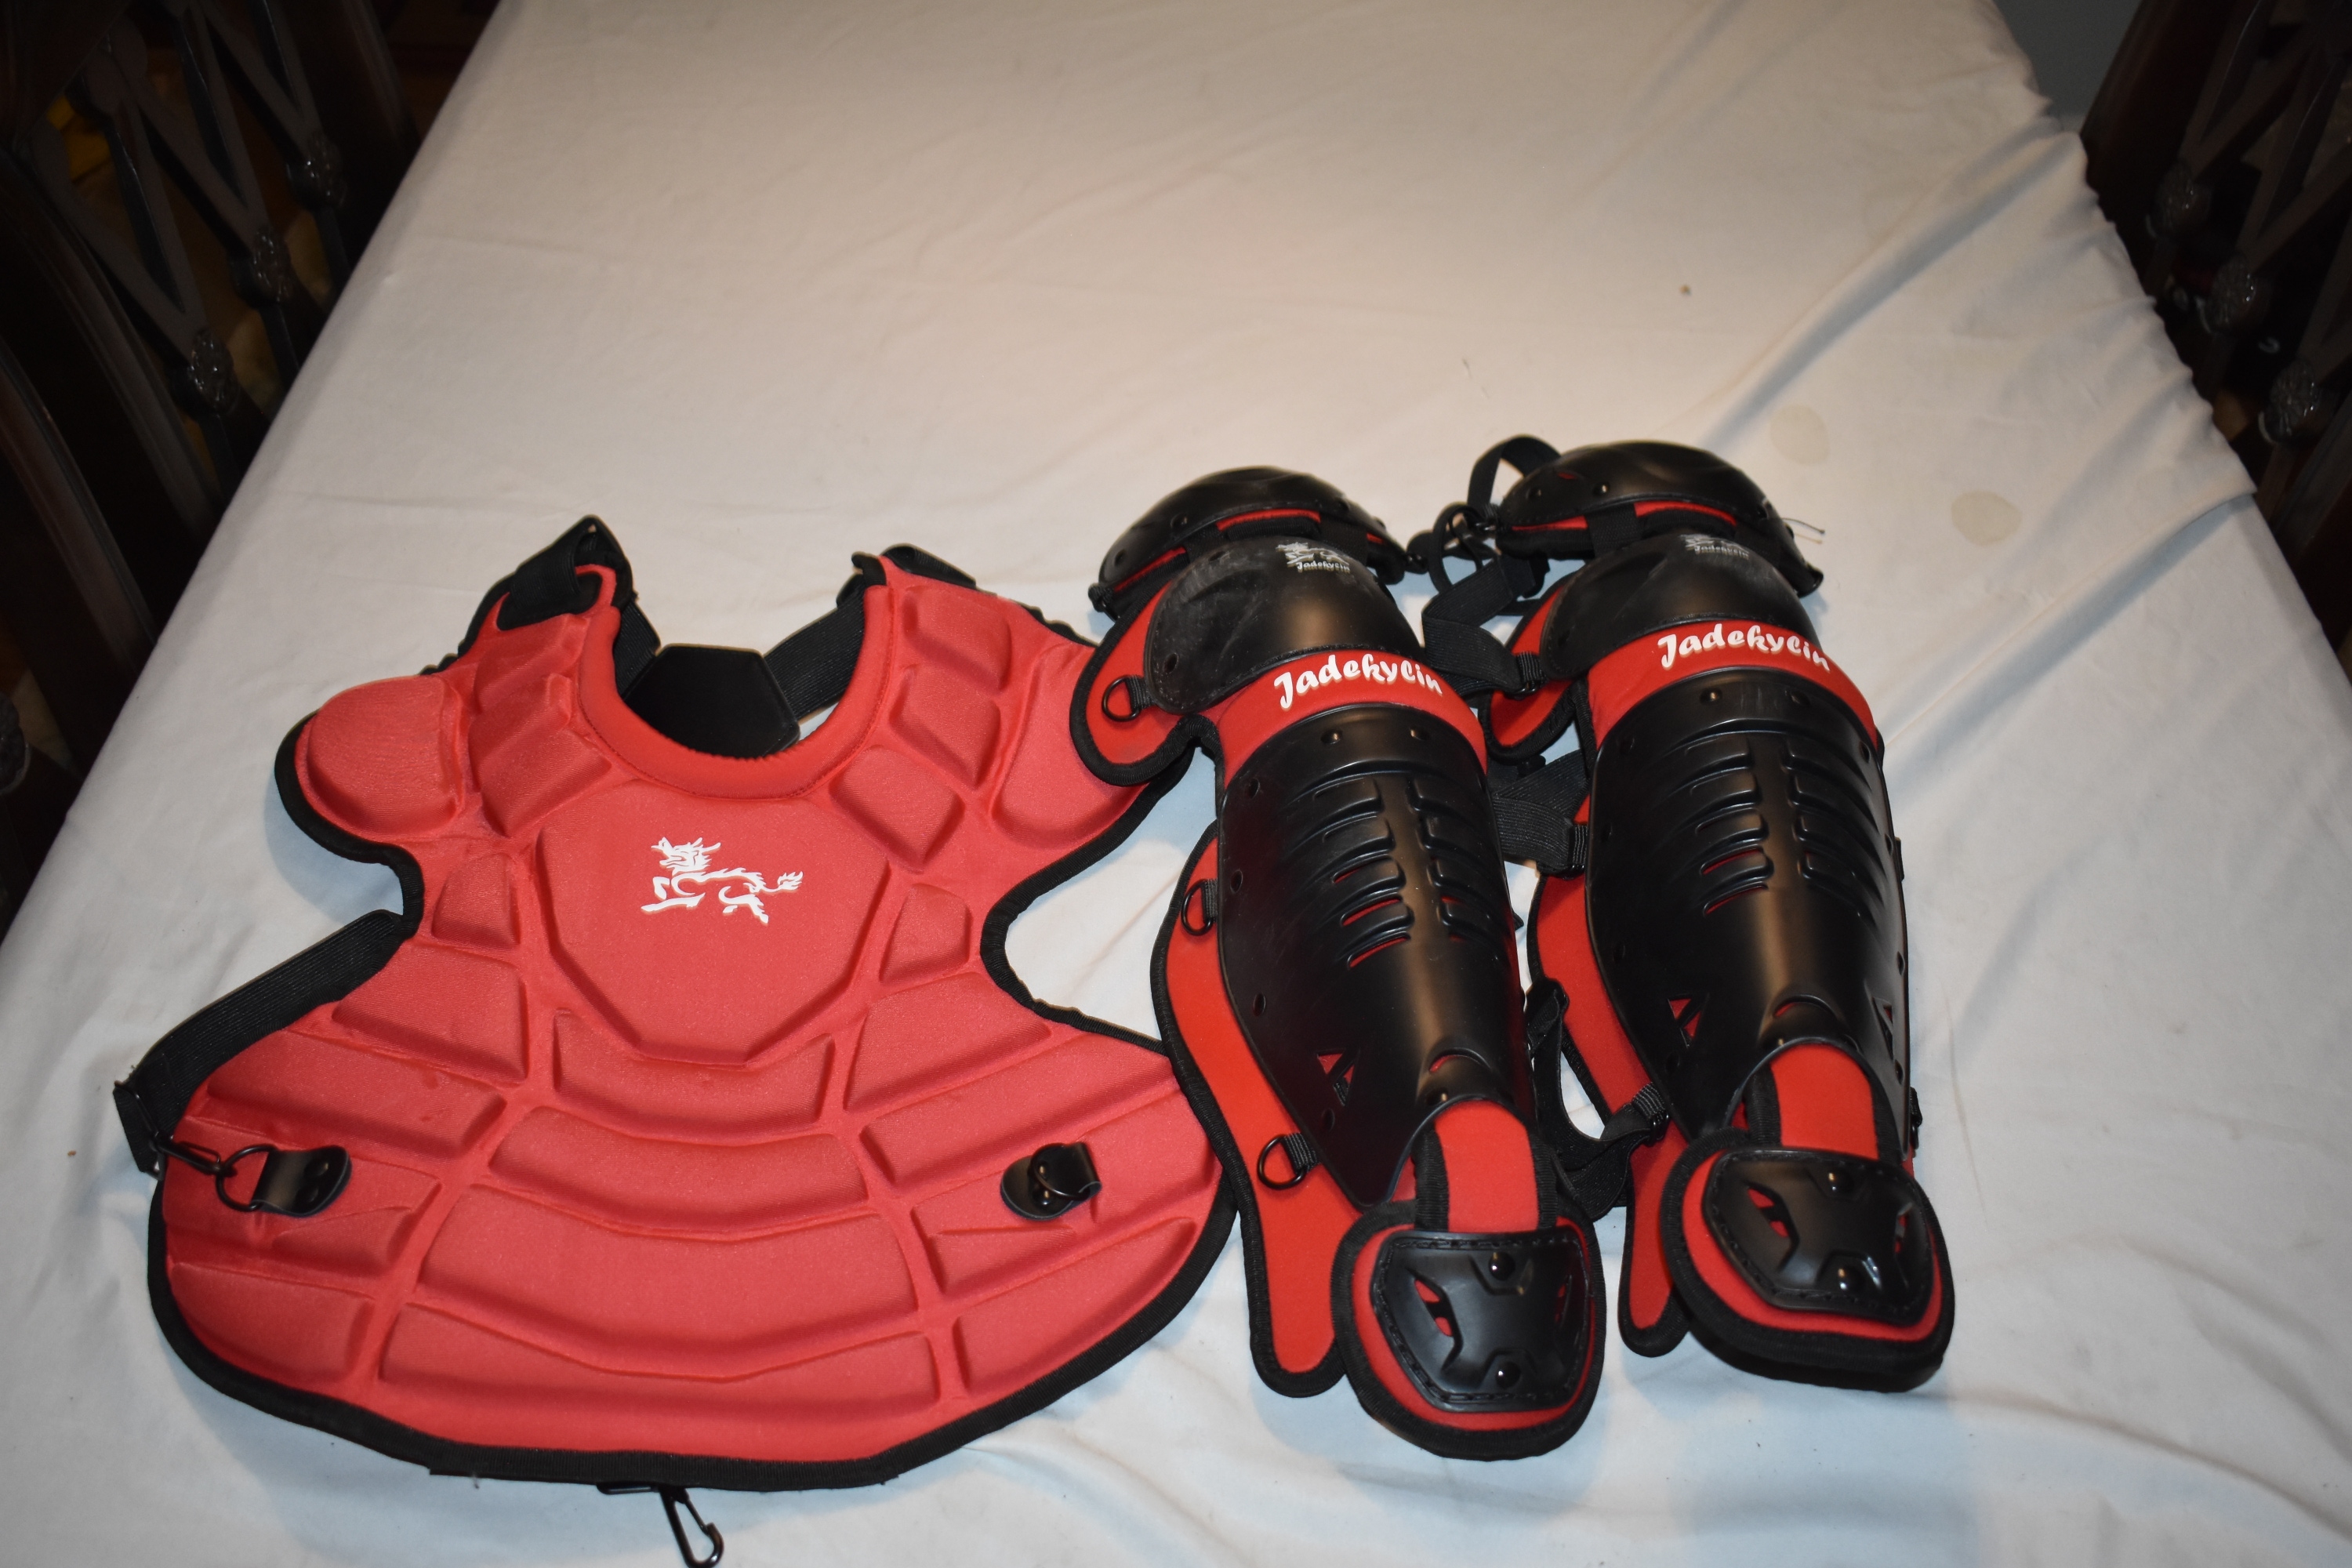 Red/Black Catcher's Set - Great Condition!